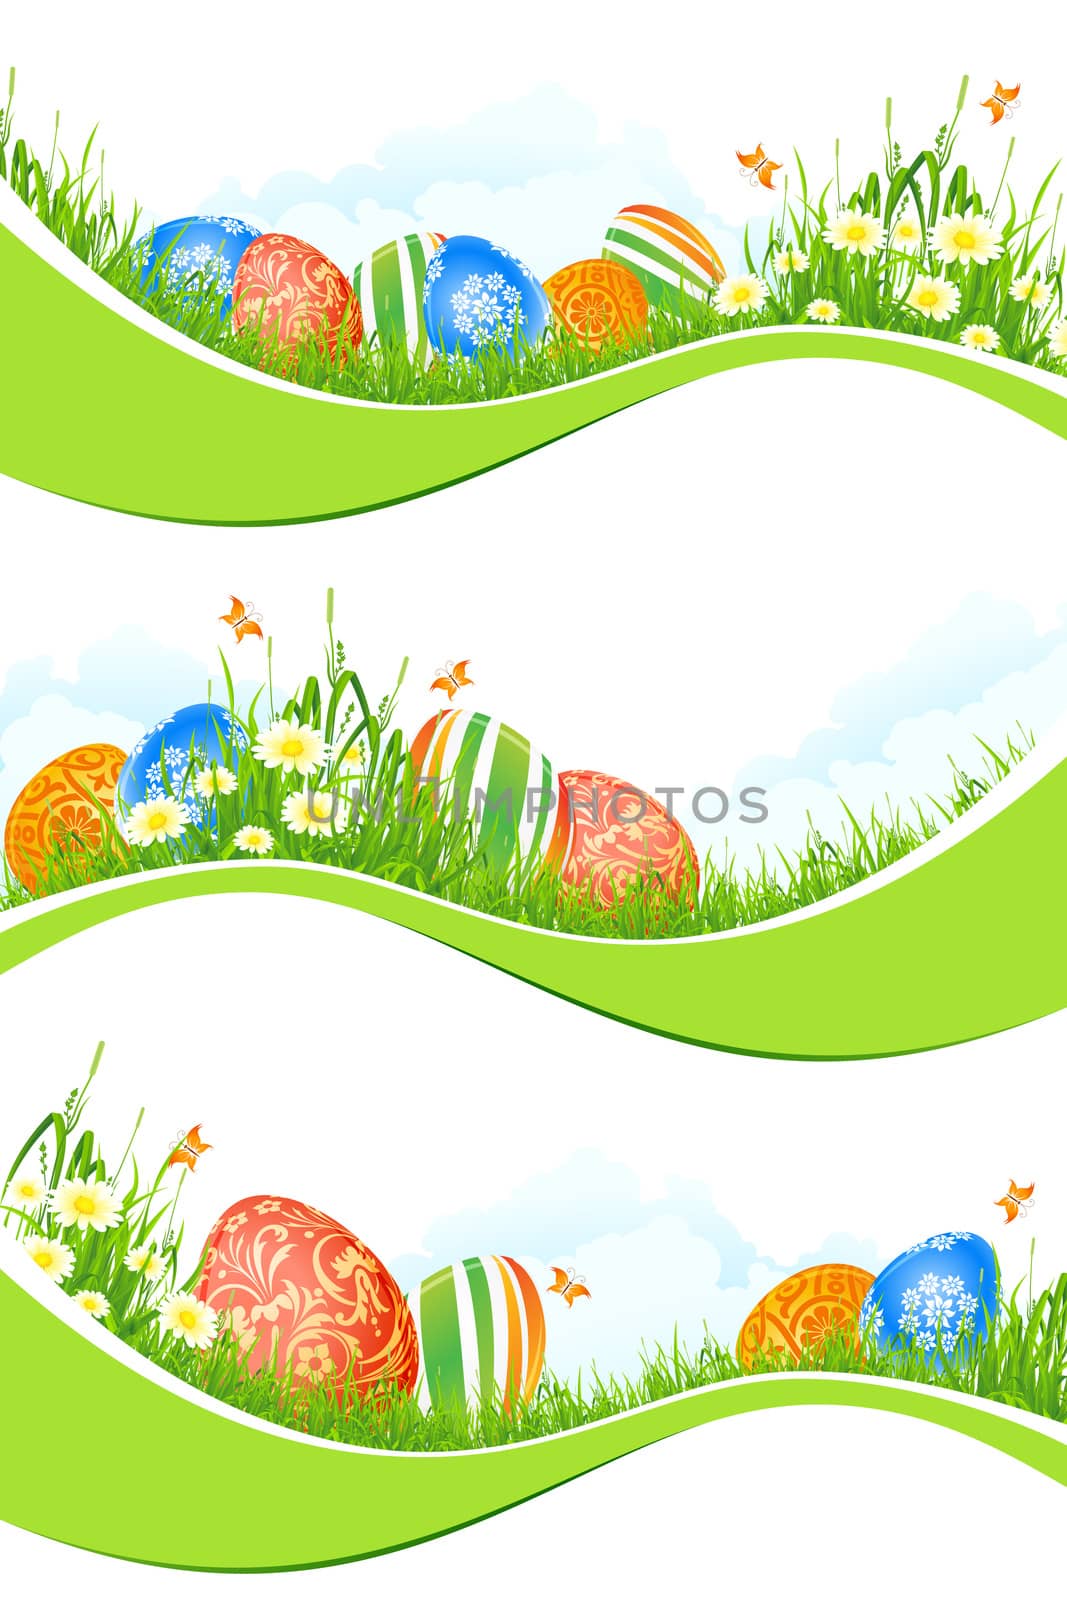 Easter Banners Set Isolated on White by WaD